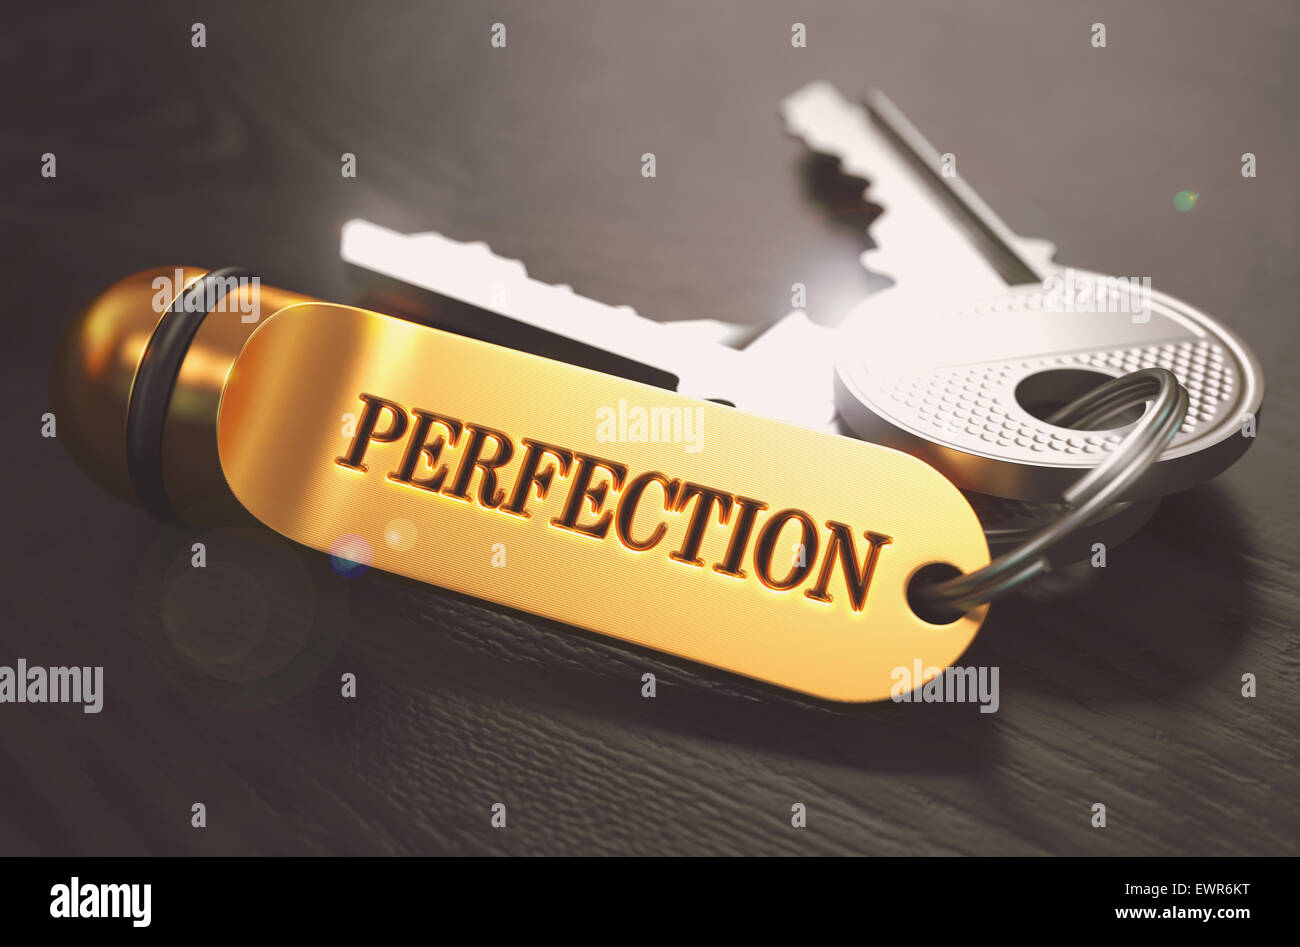 Perfection Concept. Keys with Golden Keyring on Black Wooden Table. Closeup View, Selective Focus, 3D Render. Toned Image. Stock Photo